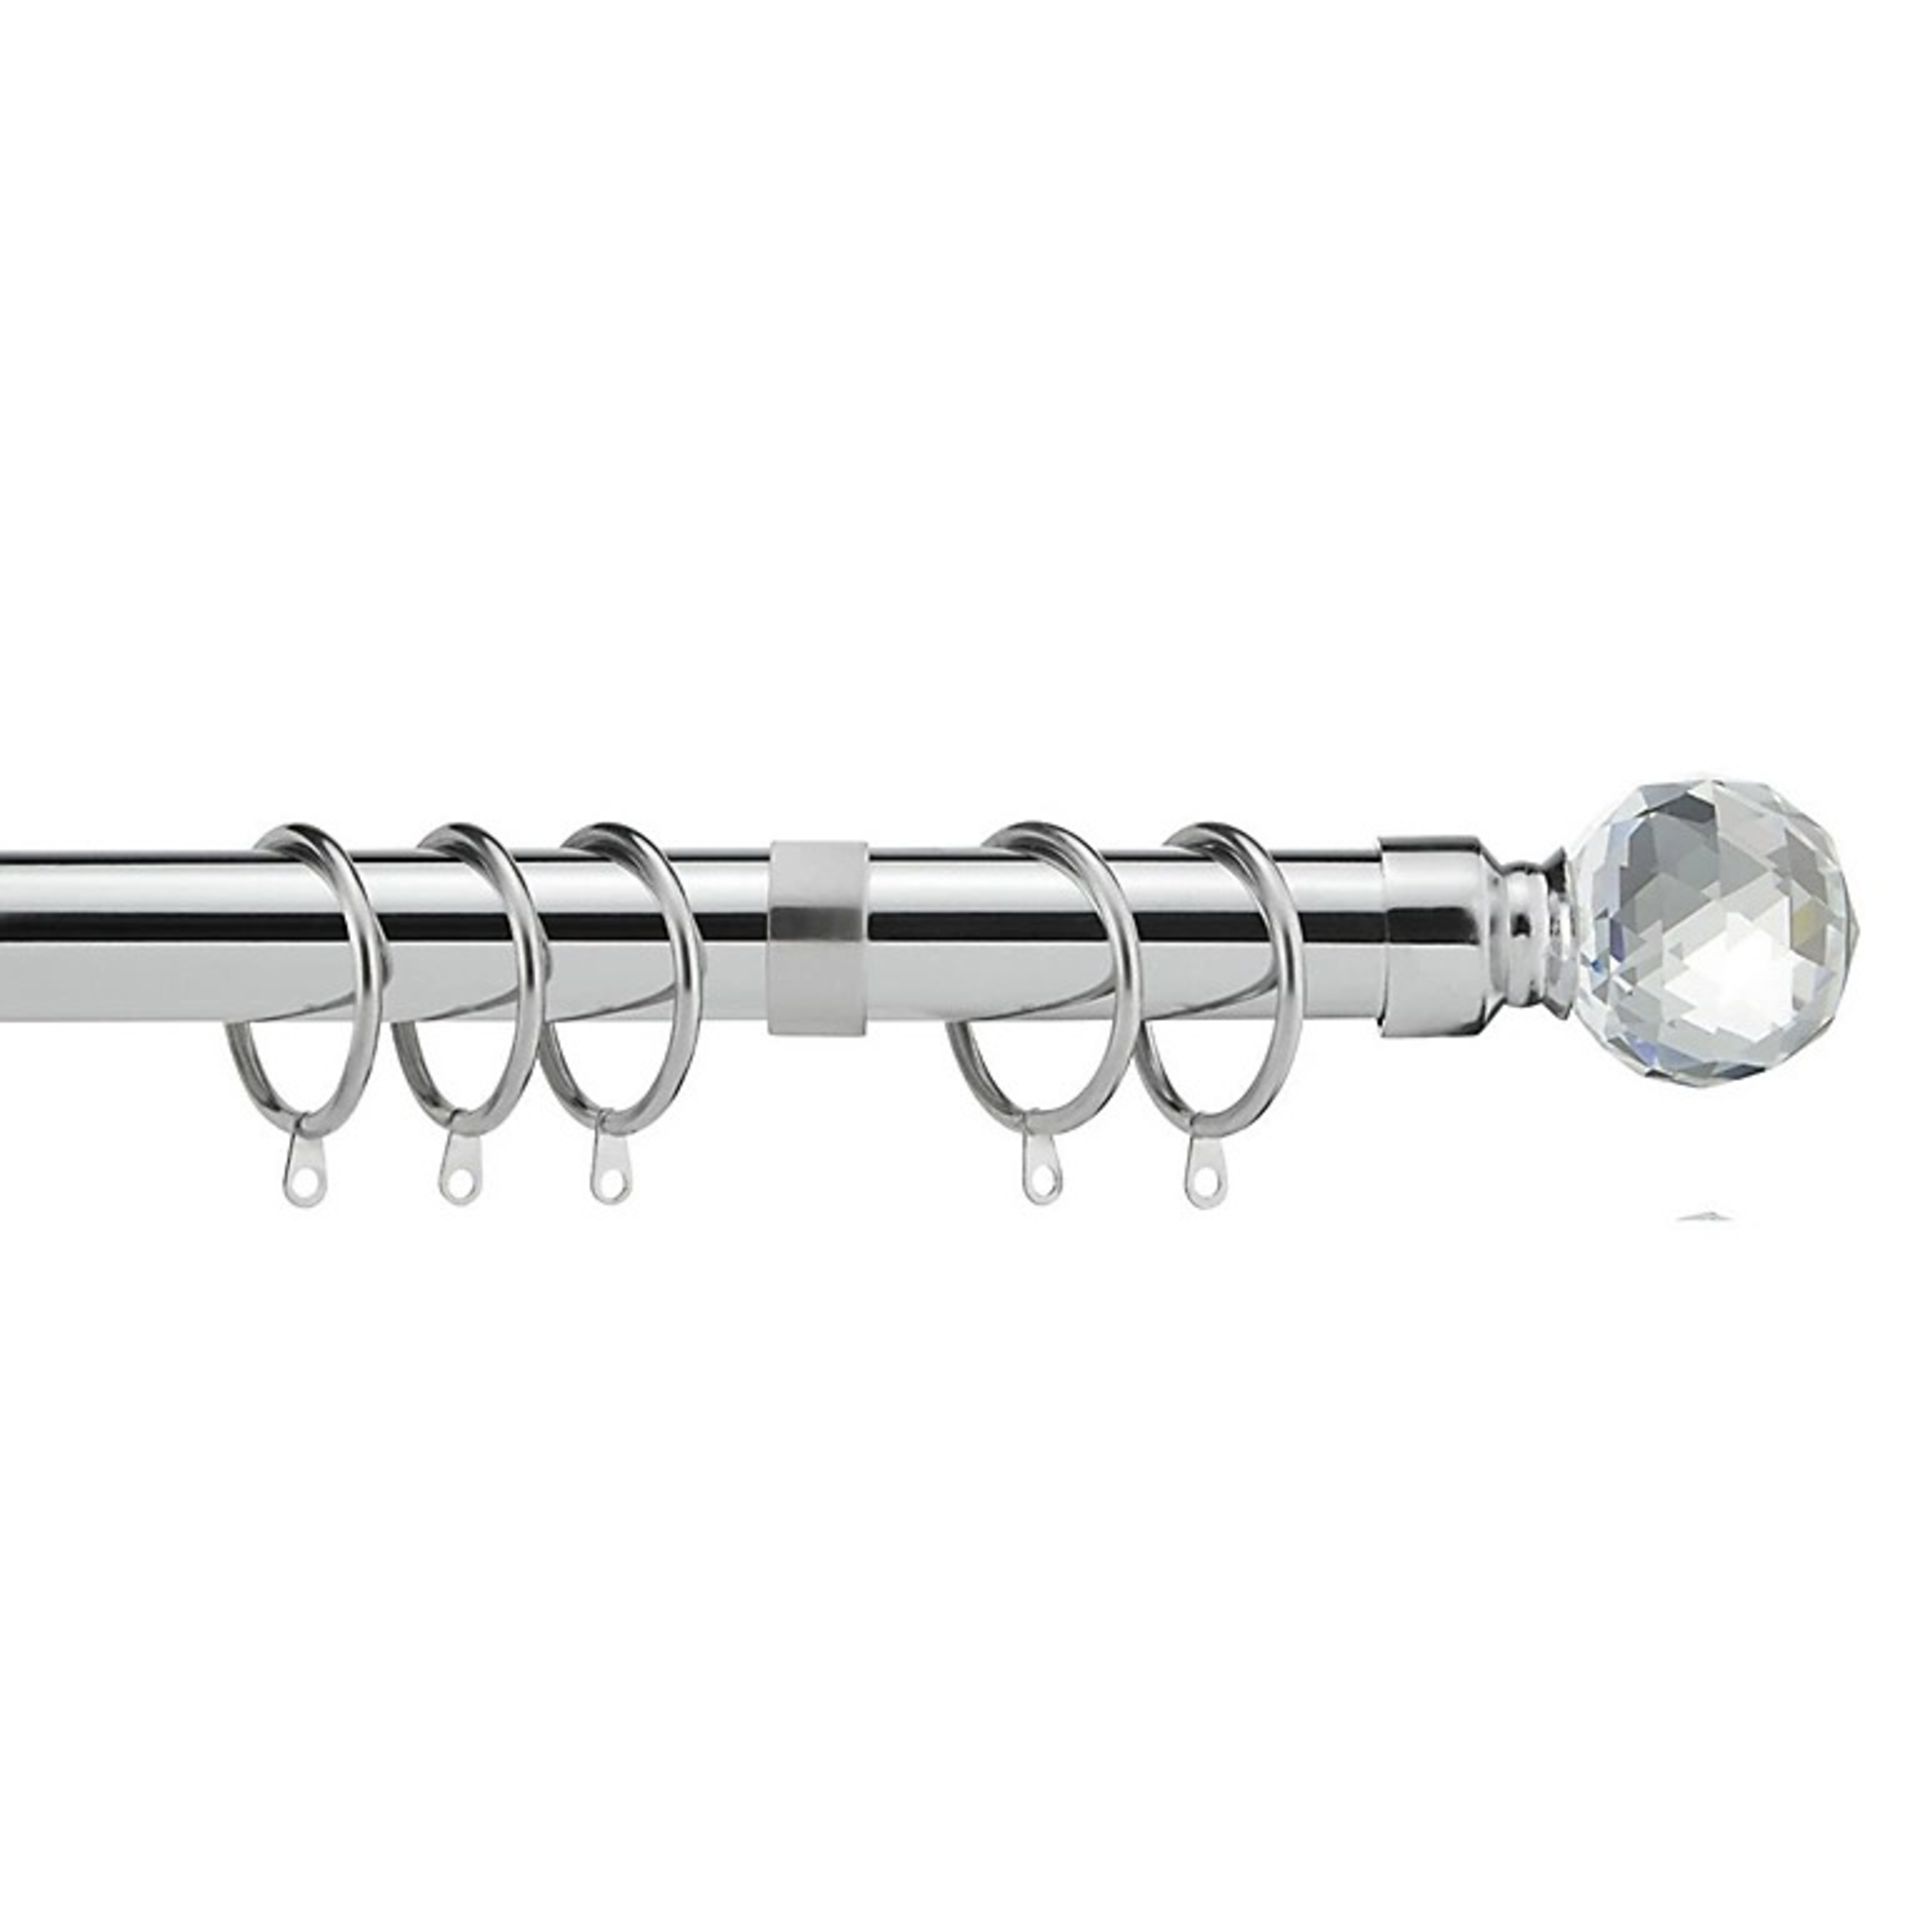 28mm Crystal End Metal Curtain Pole Set 210-300cm Chrome with Rings, Finials, Brackets &